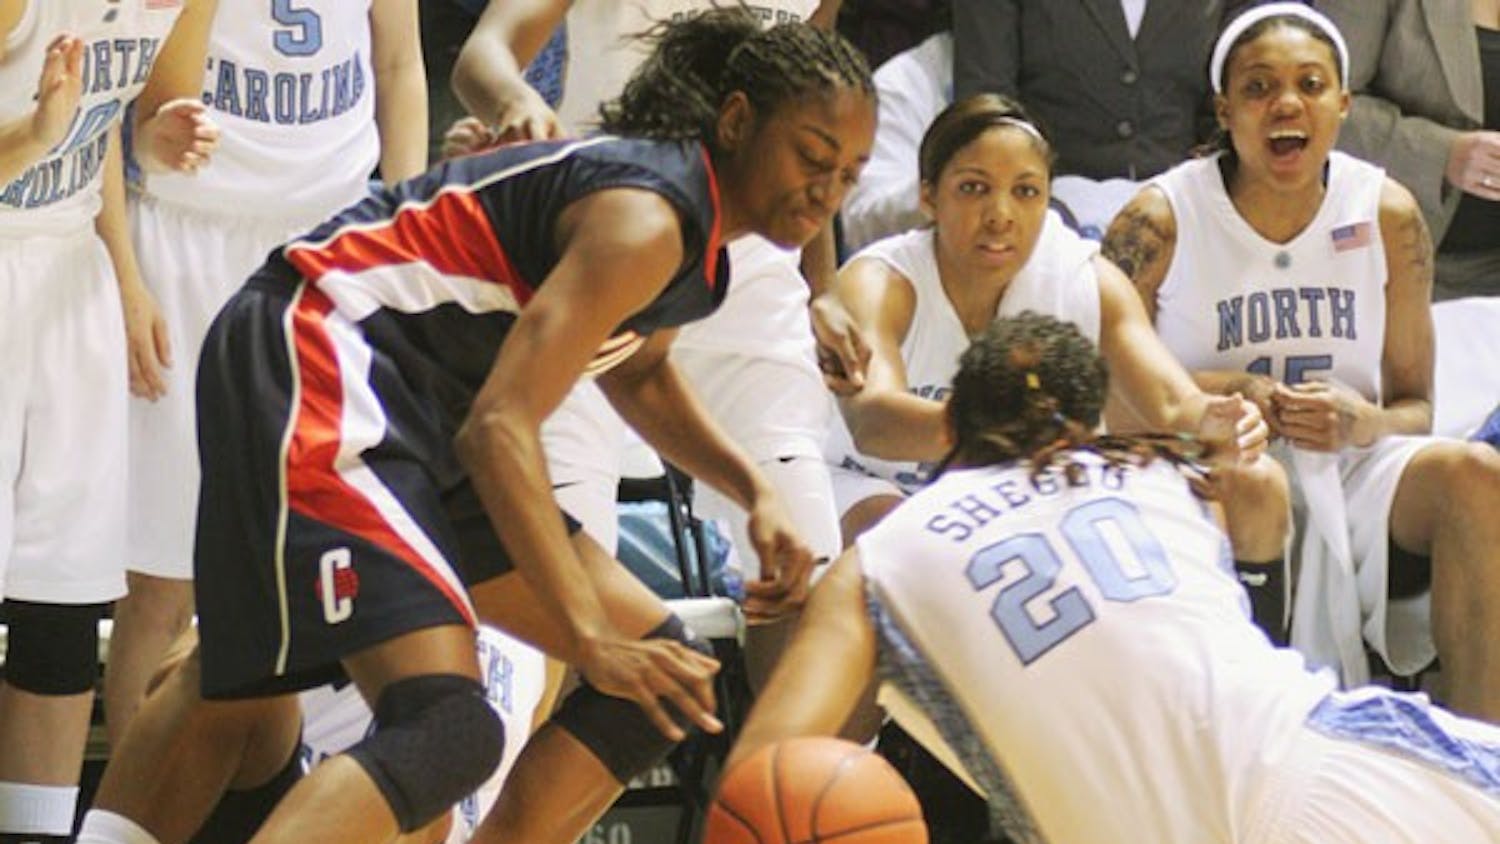 Connecticut came to the Smith Center last season and ripped North Carolina, 88-58. DTH File Photo